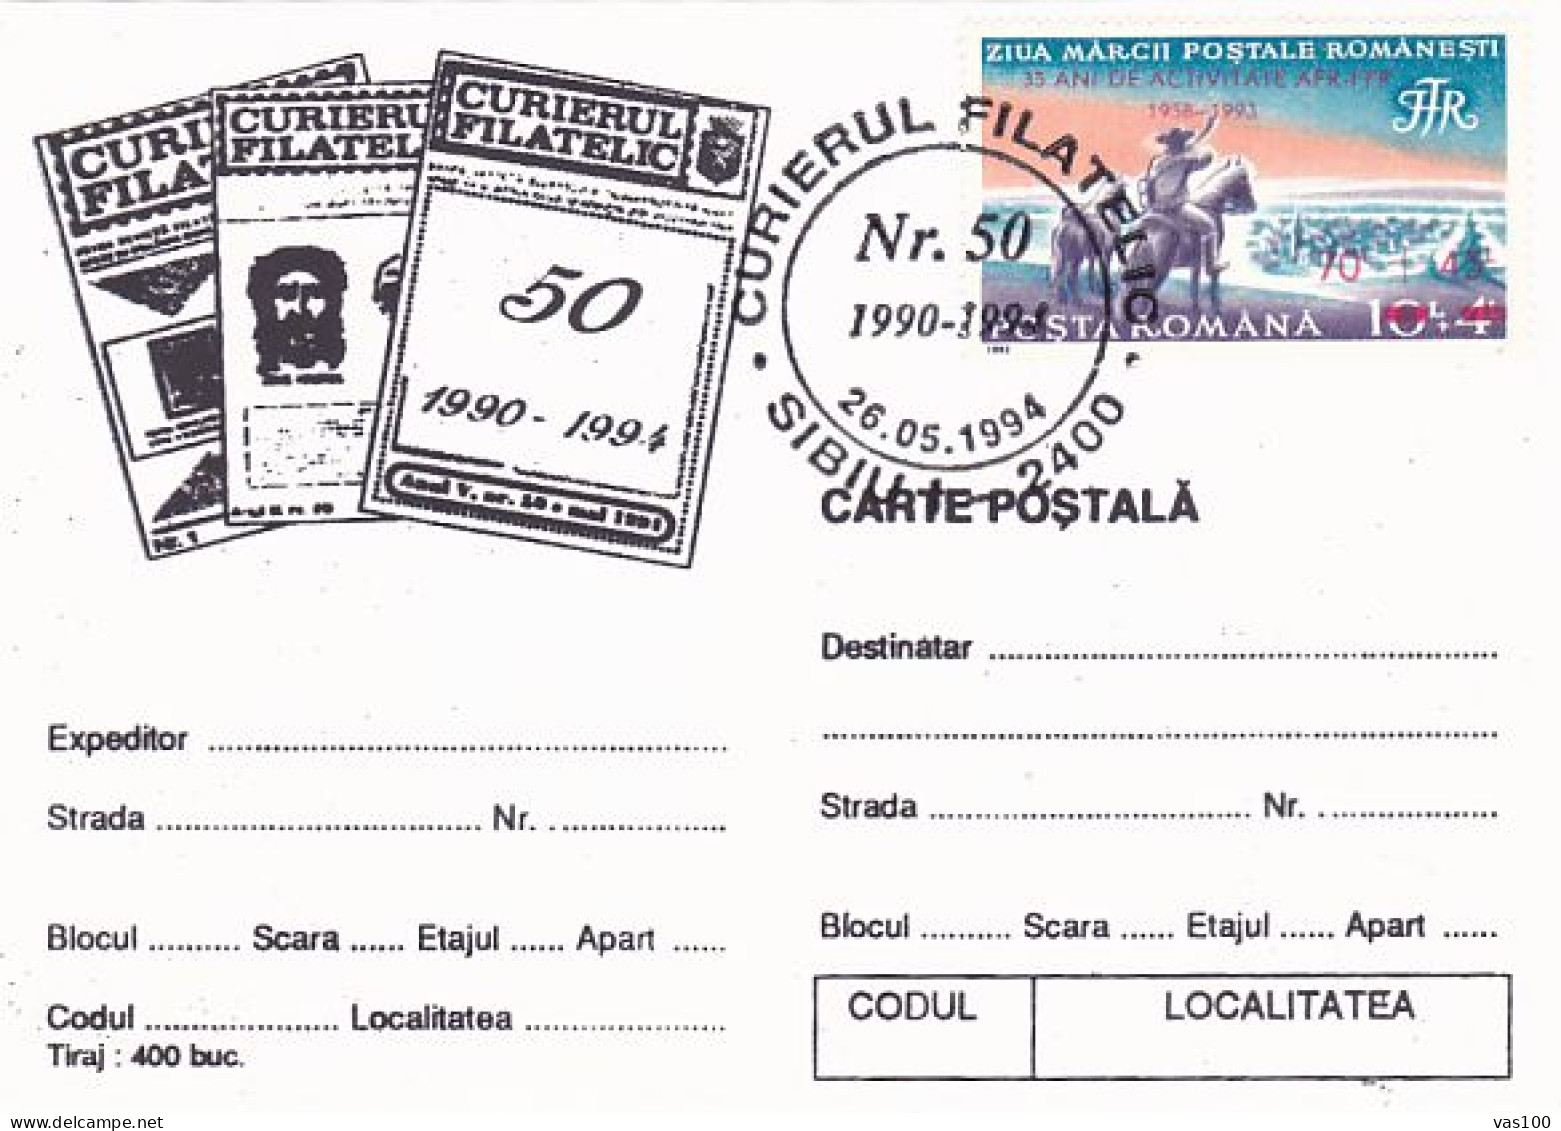 PHILATELIC COURIER MAGAZINE ANNIVERSARY, OVERPRINT STAMP, SPECIAL POSTCARD, 1994, ROMANIA - Covers & Documents